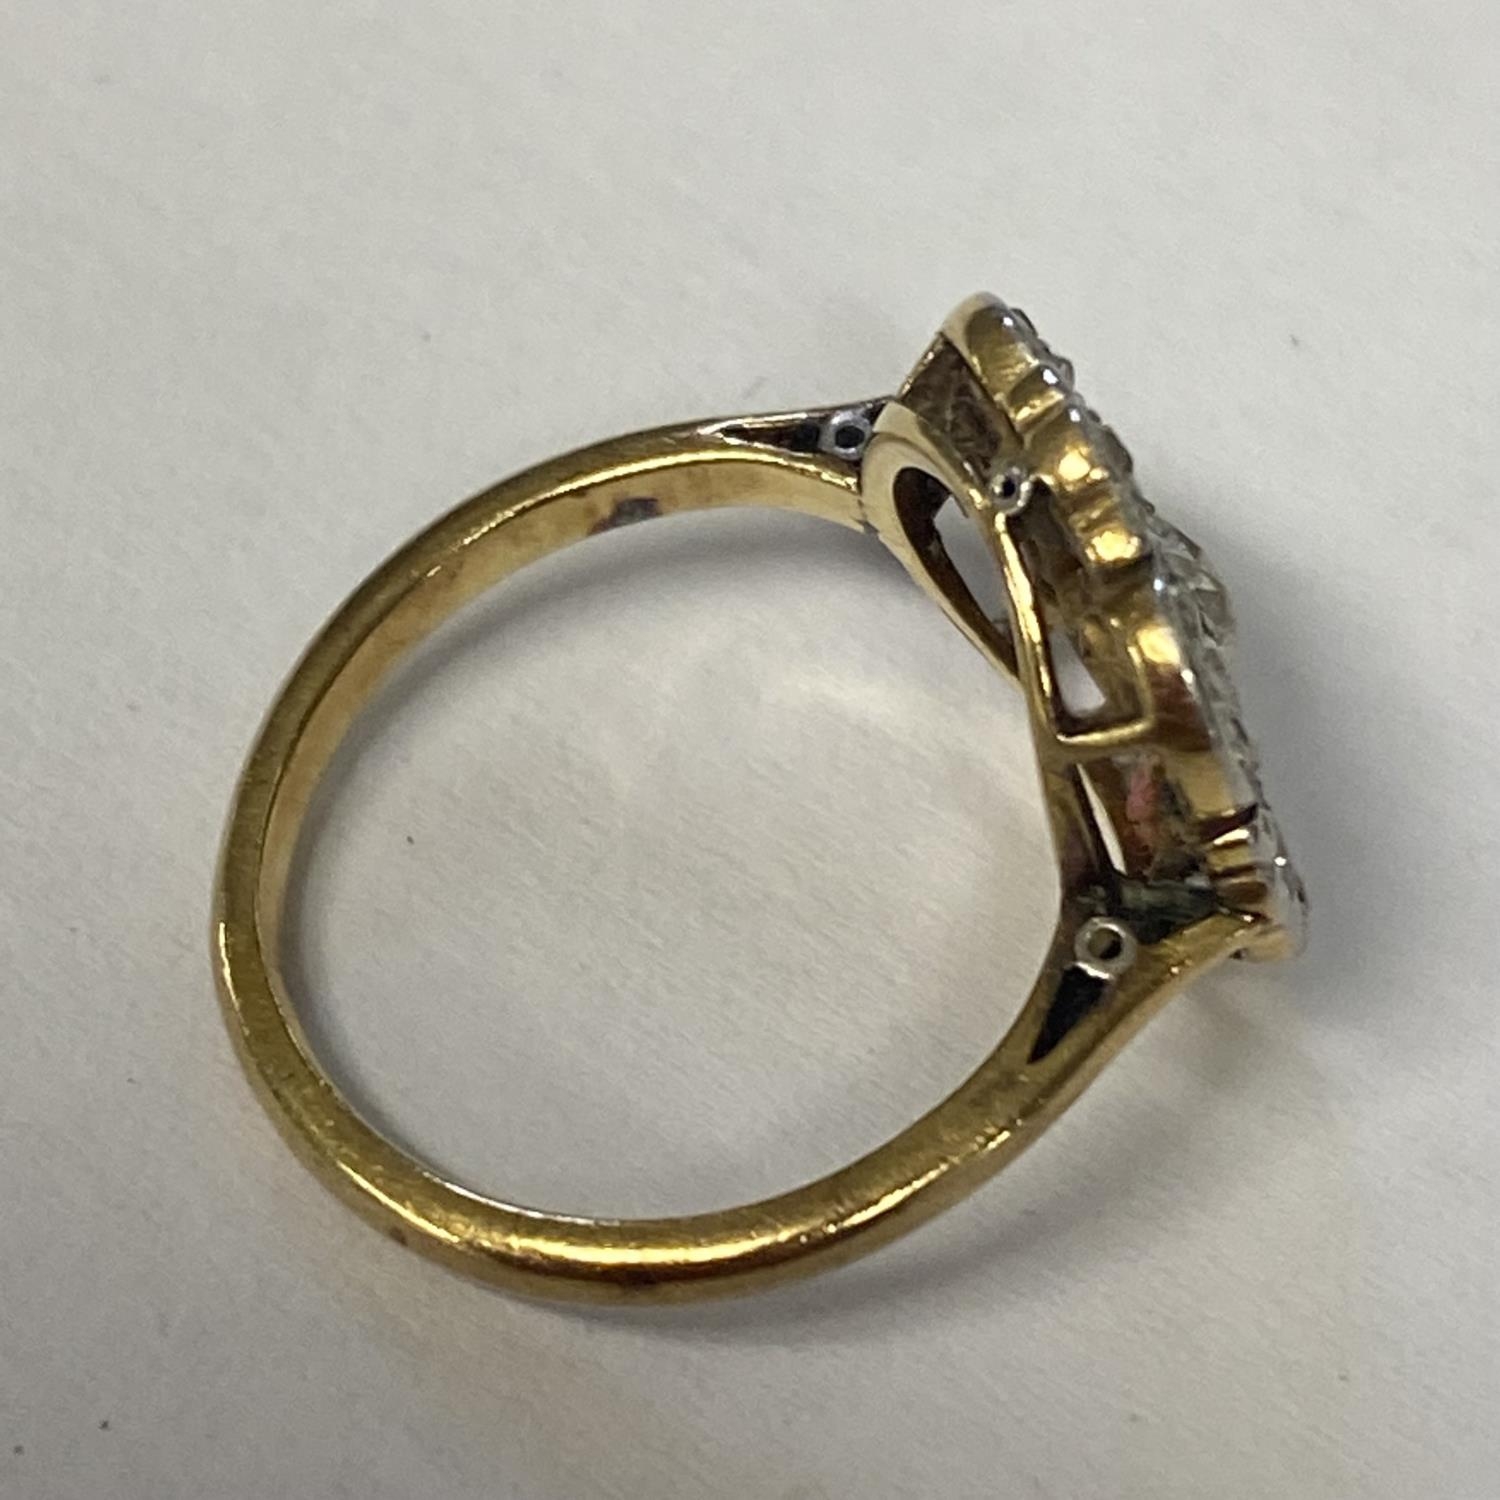 An unmarked white and yellow metal and diamond ring, pierced design with central old cut diamond - Image 2 of 2